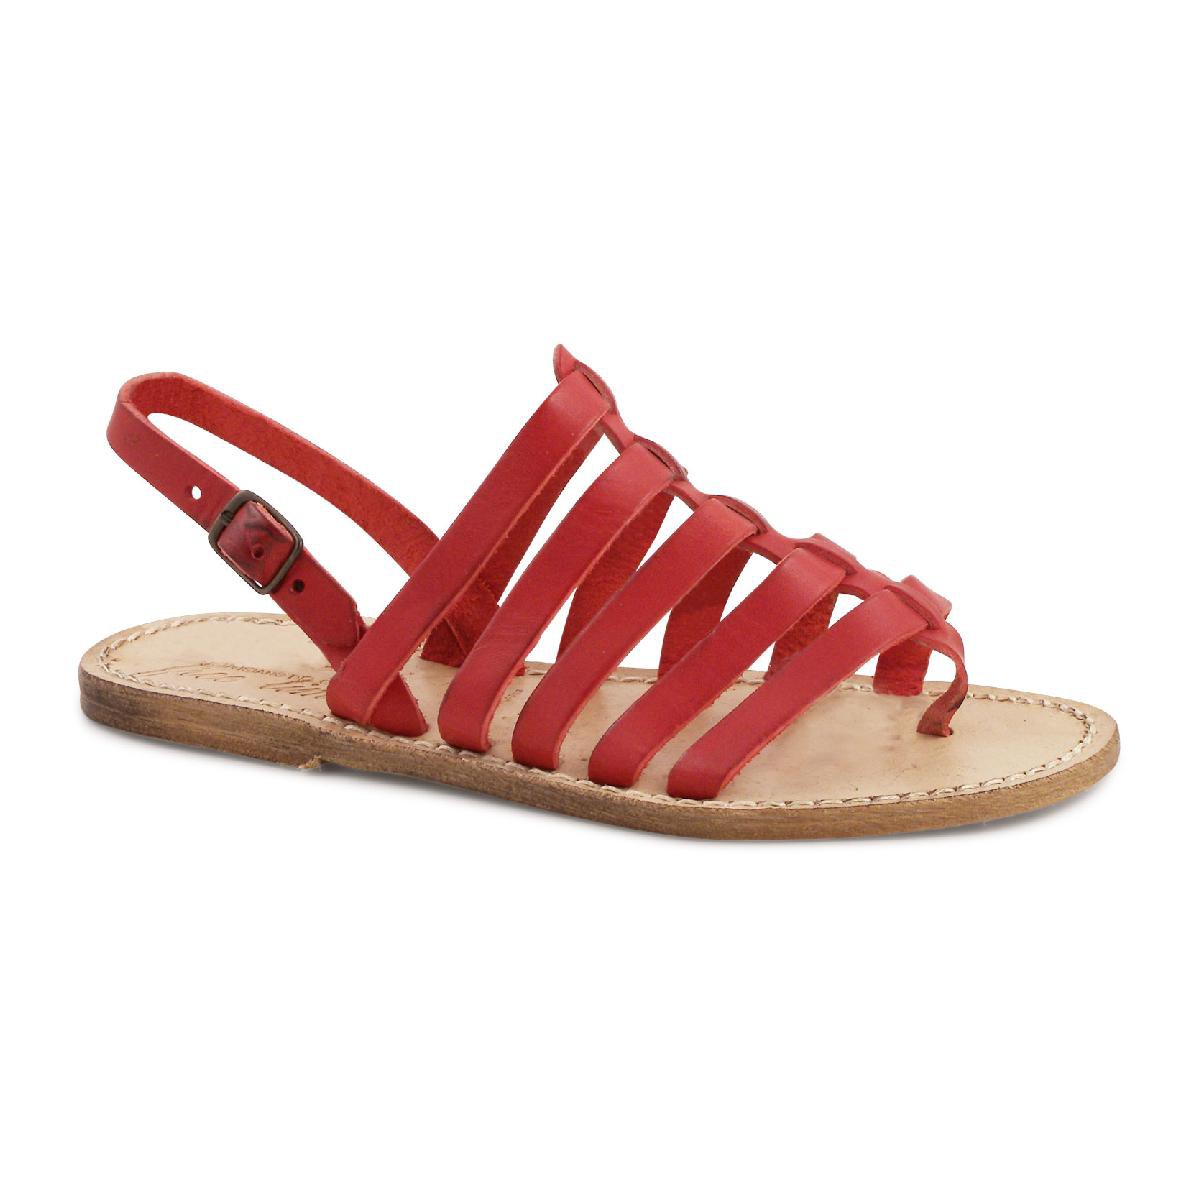 Vintage leather thong sandals for women | Gianluca - The leather craftsman